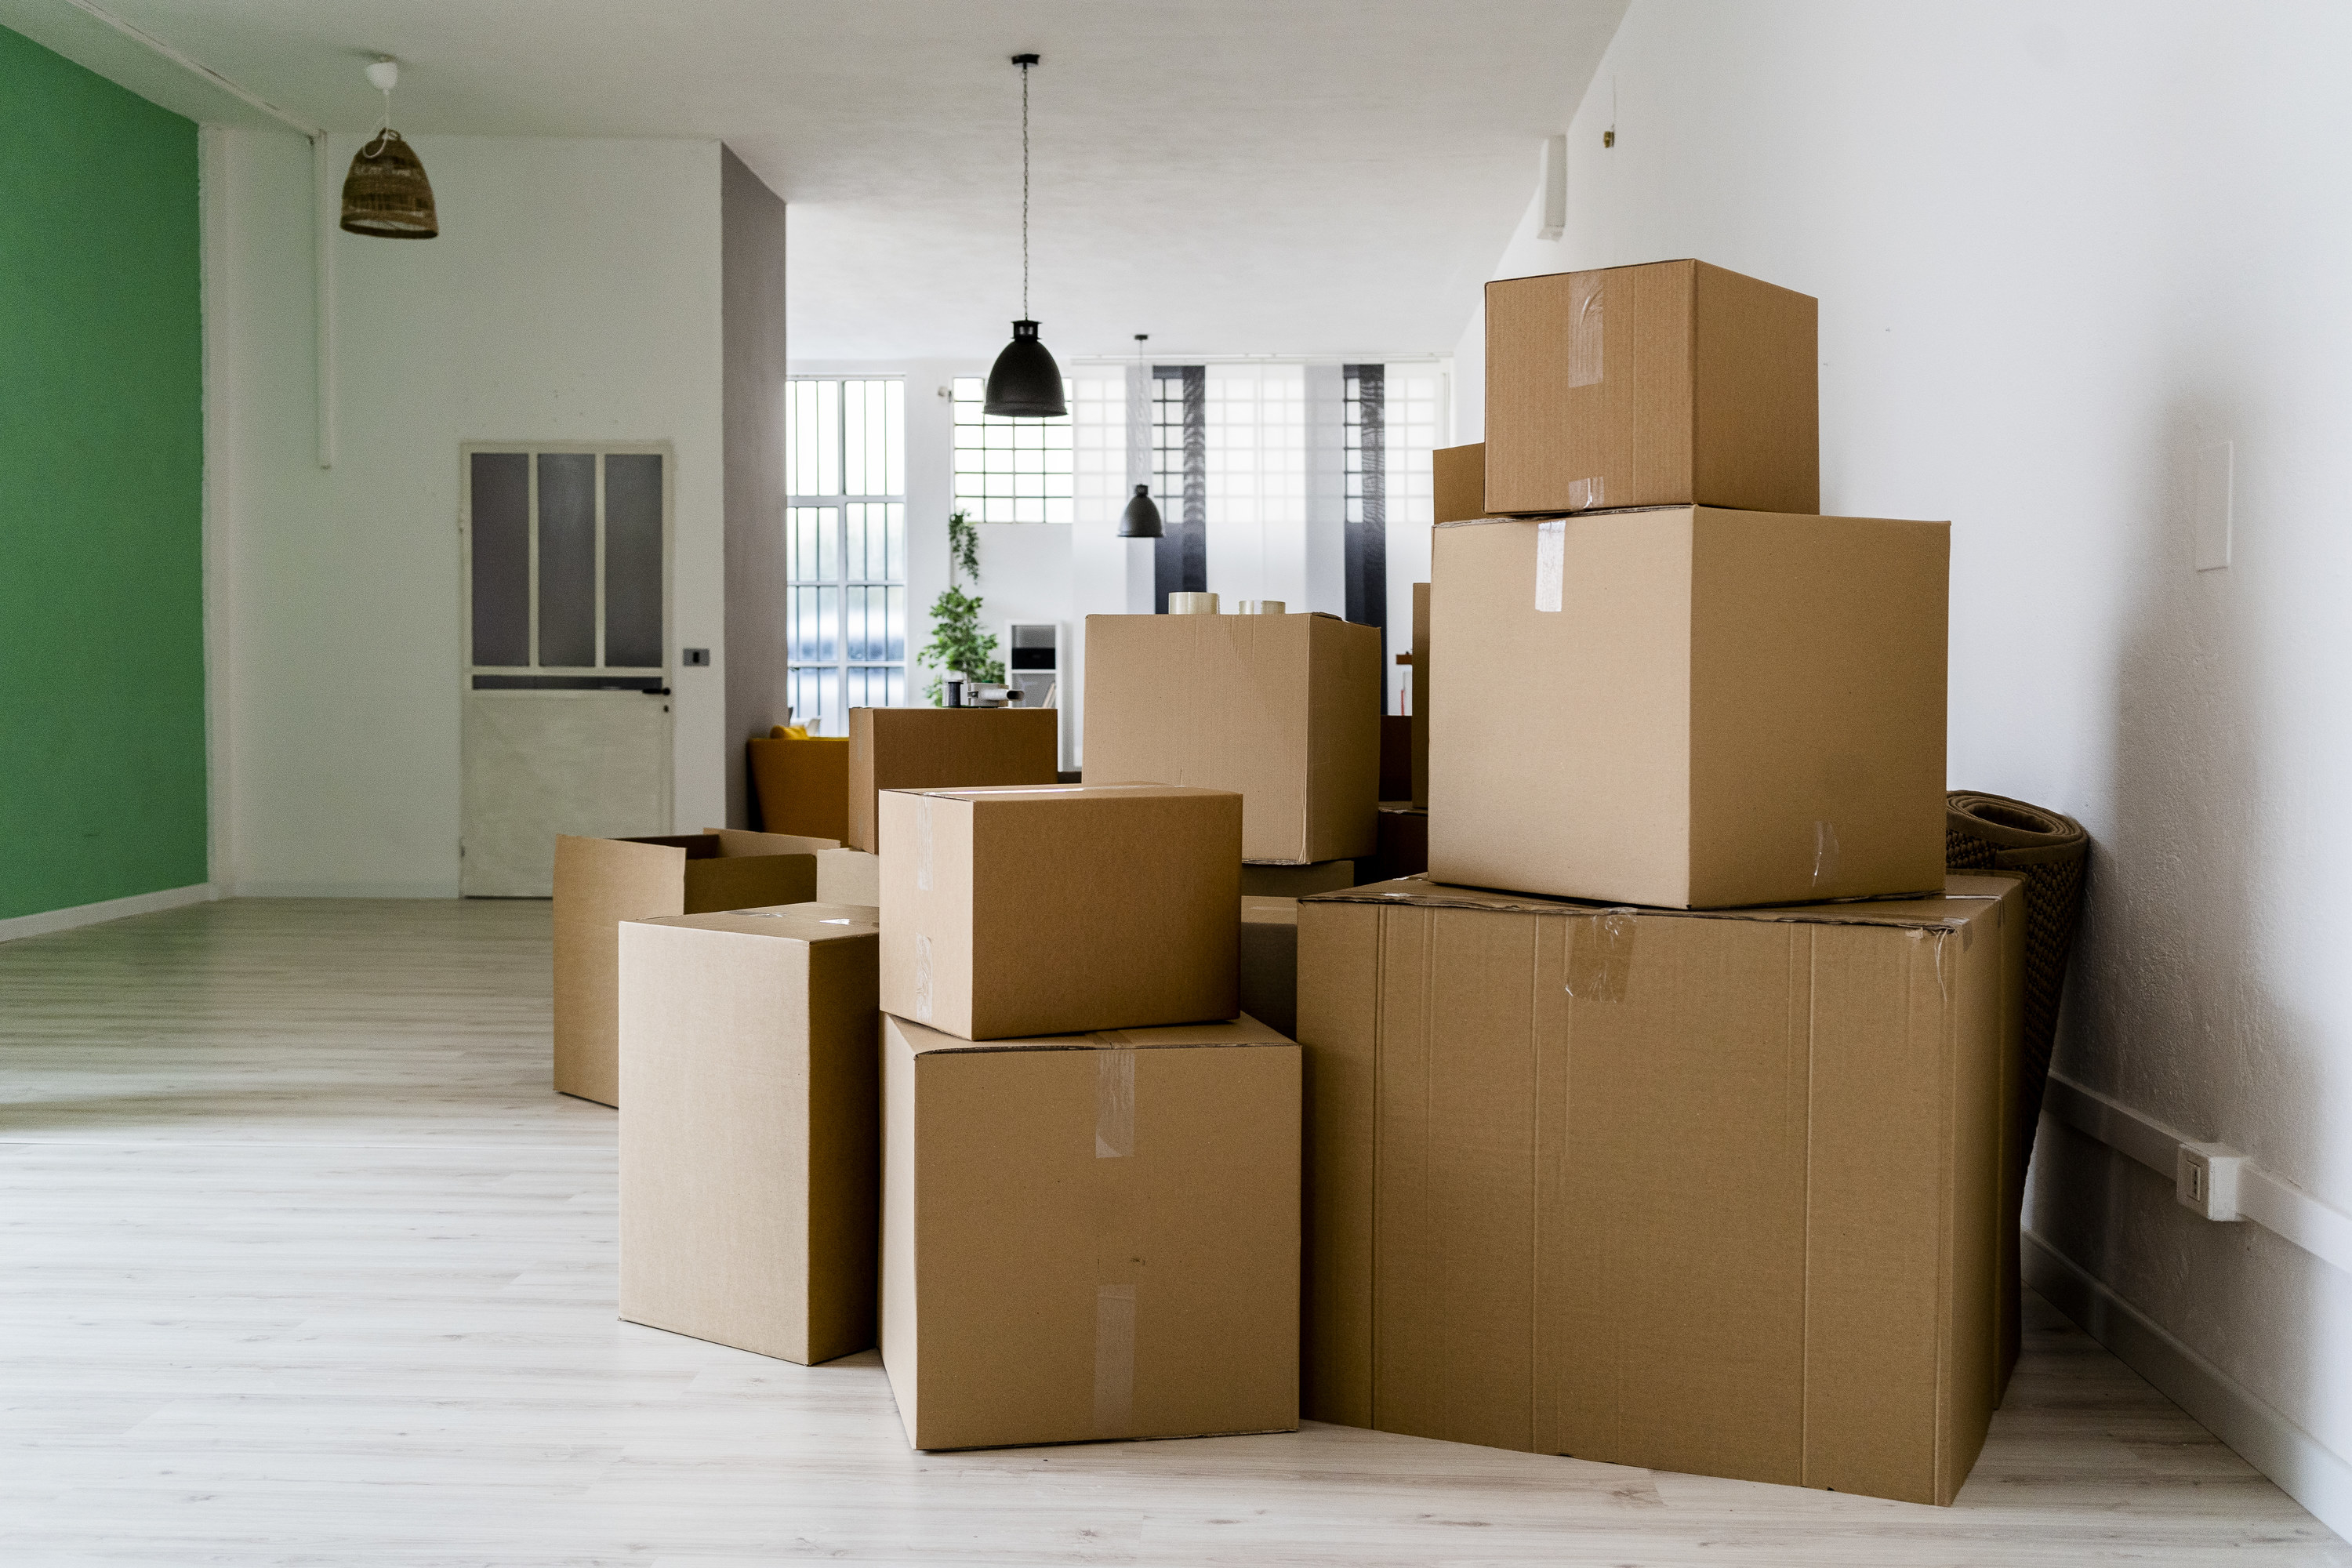 Moving boxes sitting on the floor in a house